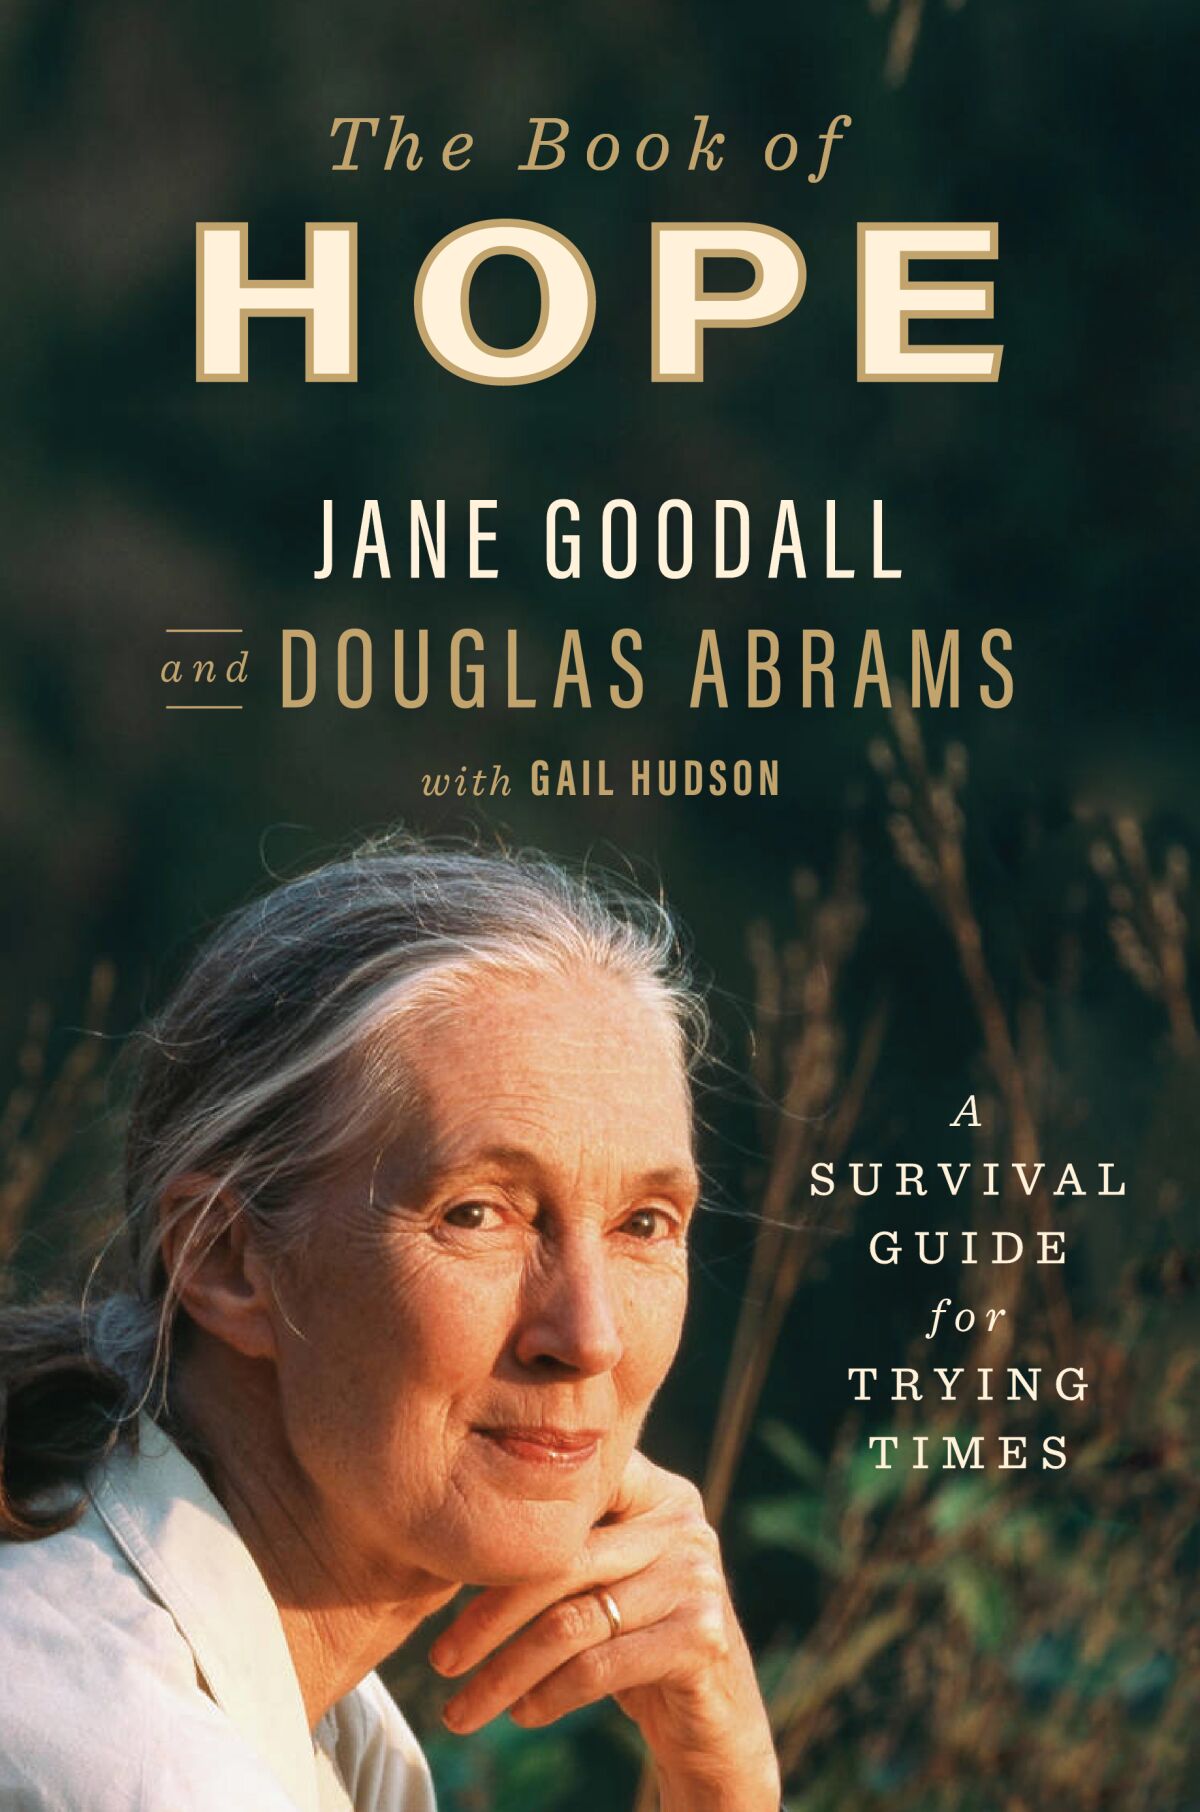 Book cover for "The Book of Hope: A Survival Guide for Trying Times" by Jane Goodall and Douglas Abrams.